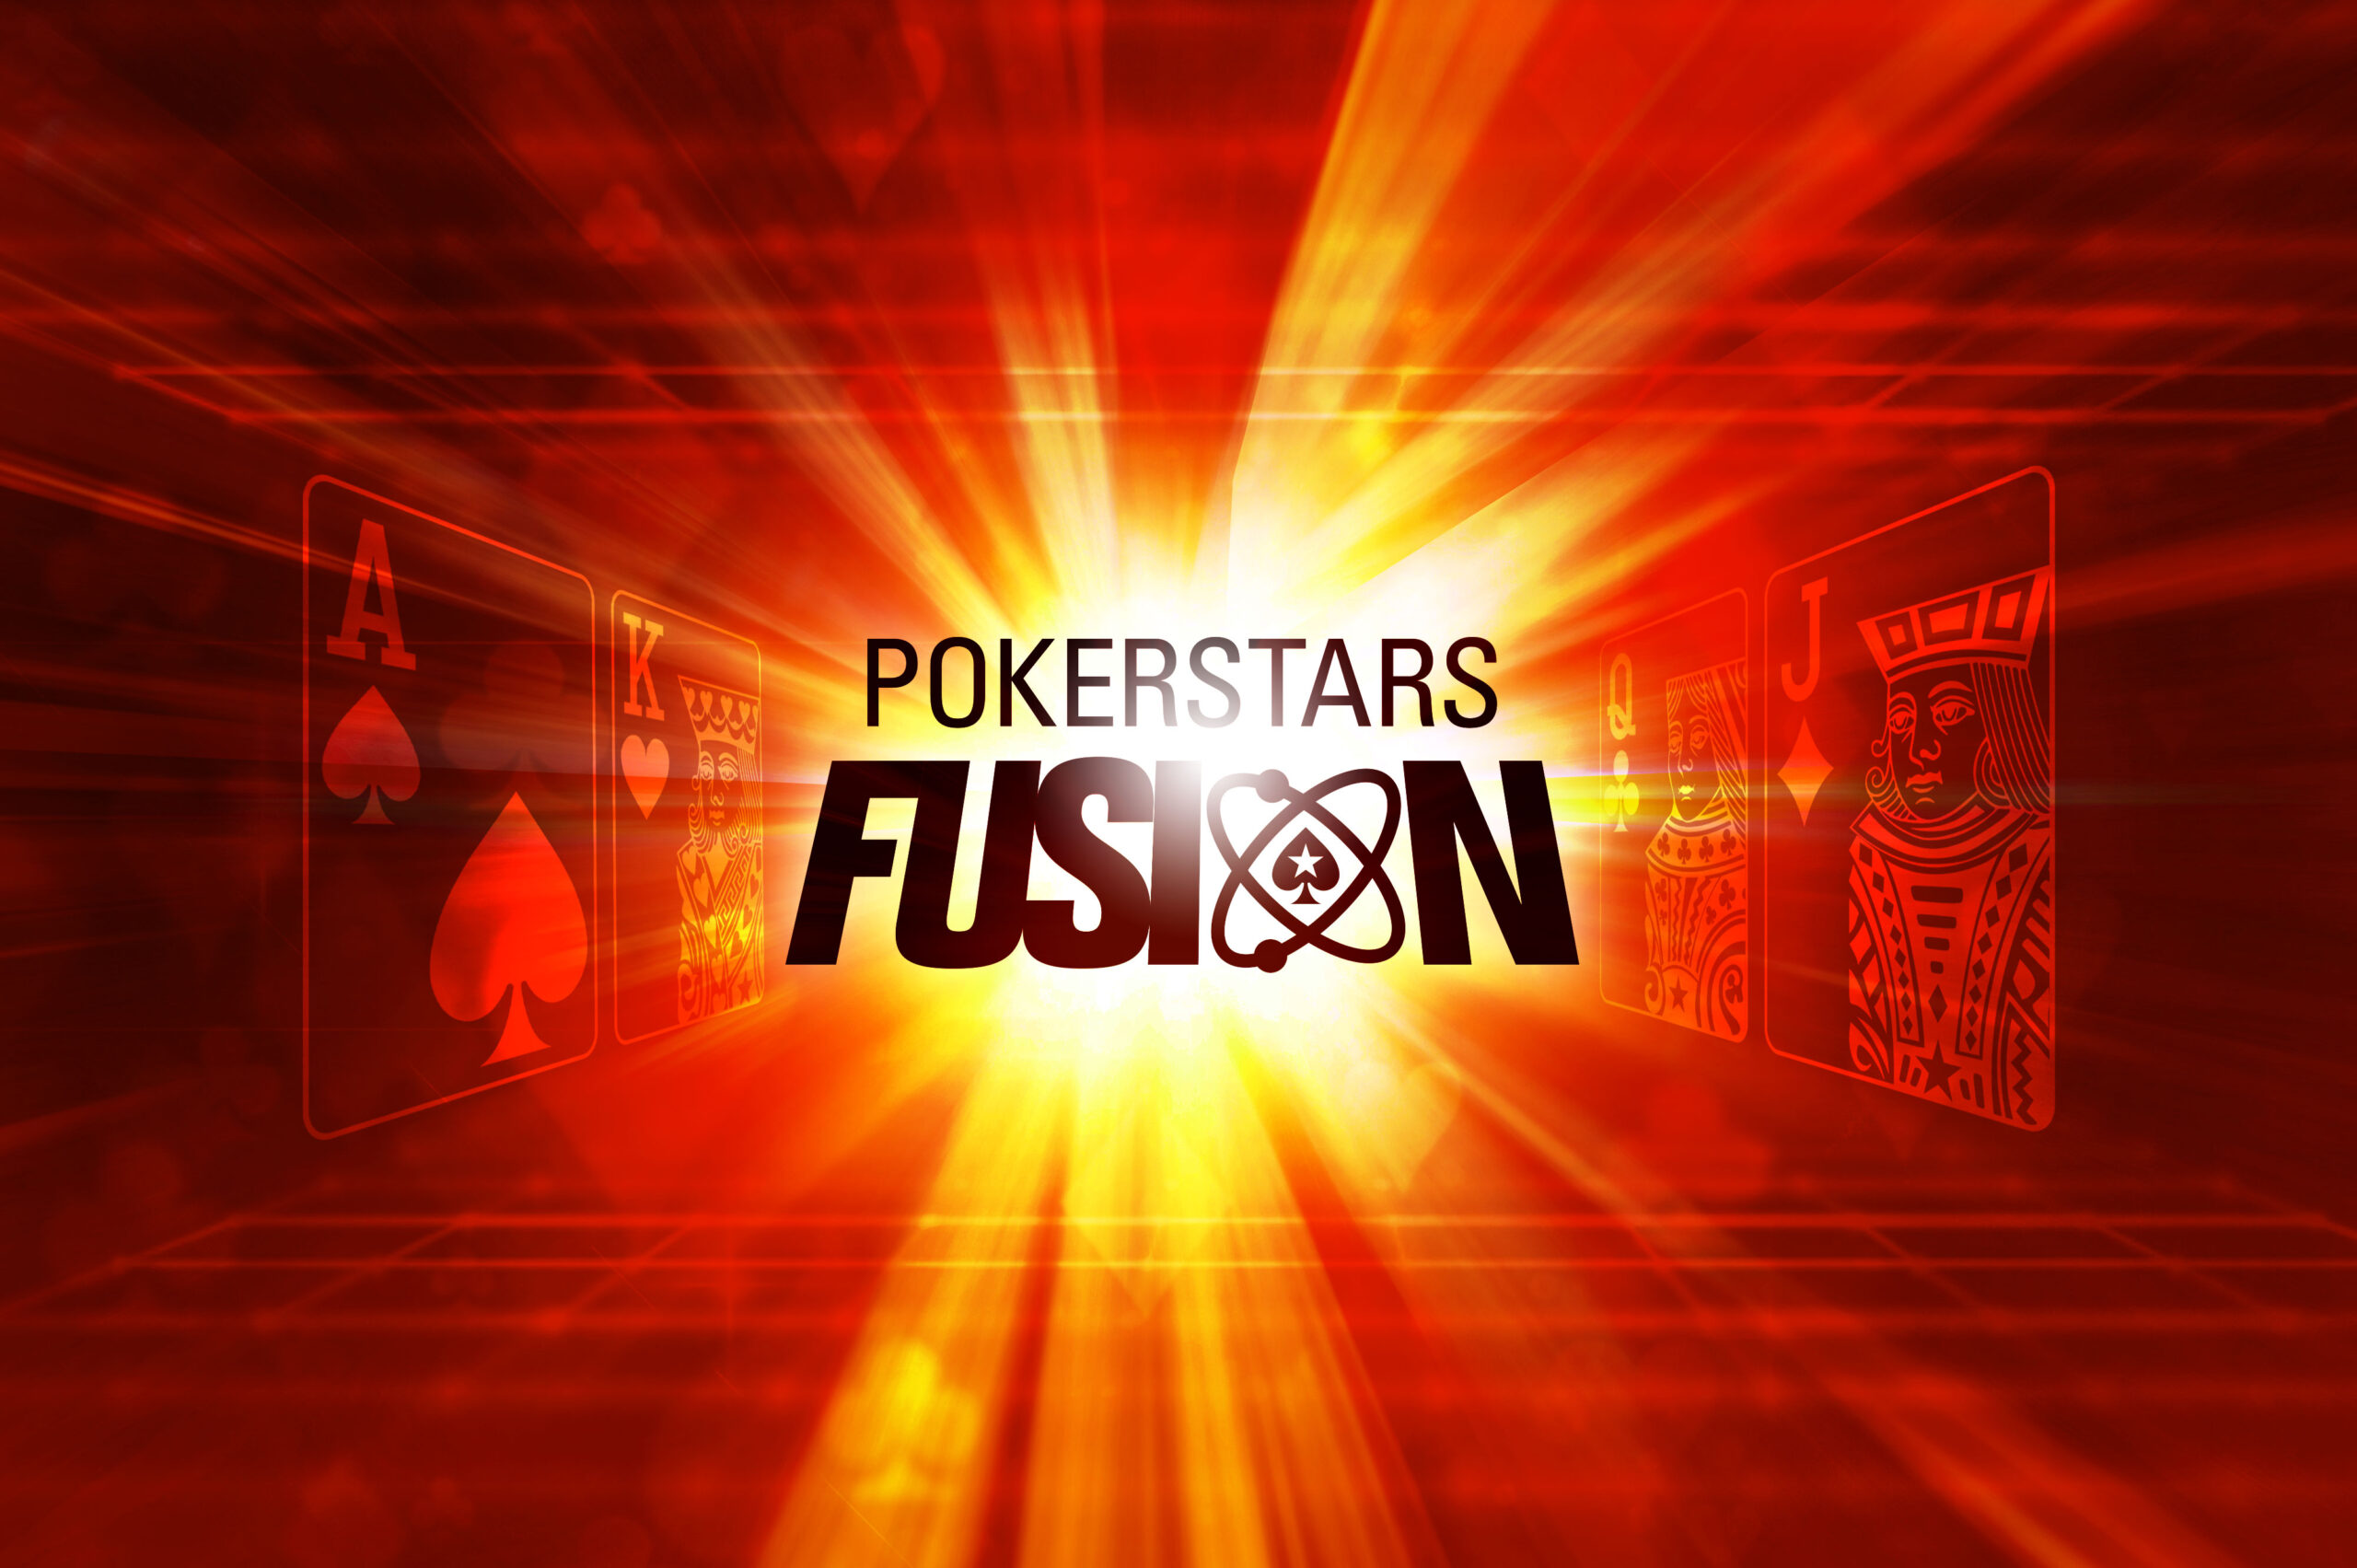 Can New PokerStars ‘Fusion’ Mix of PLO and Hold’em Recharge Poker Revenue?